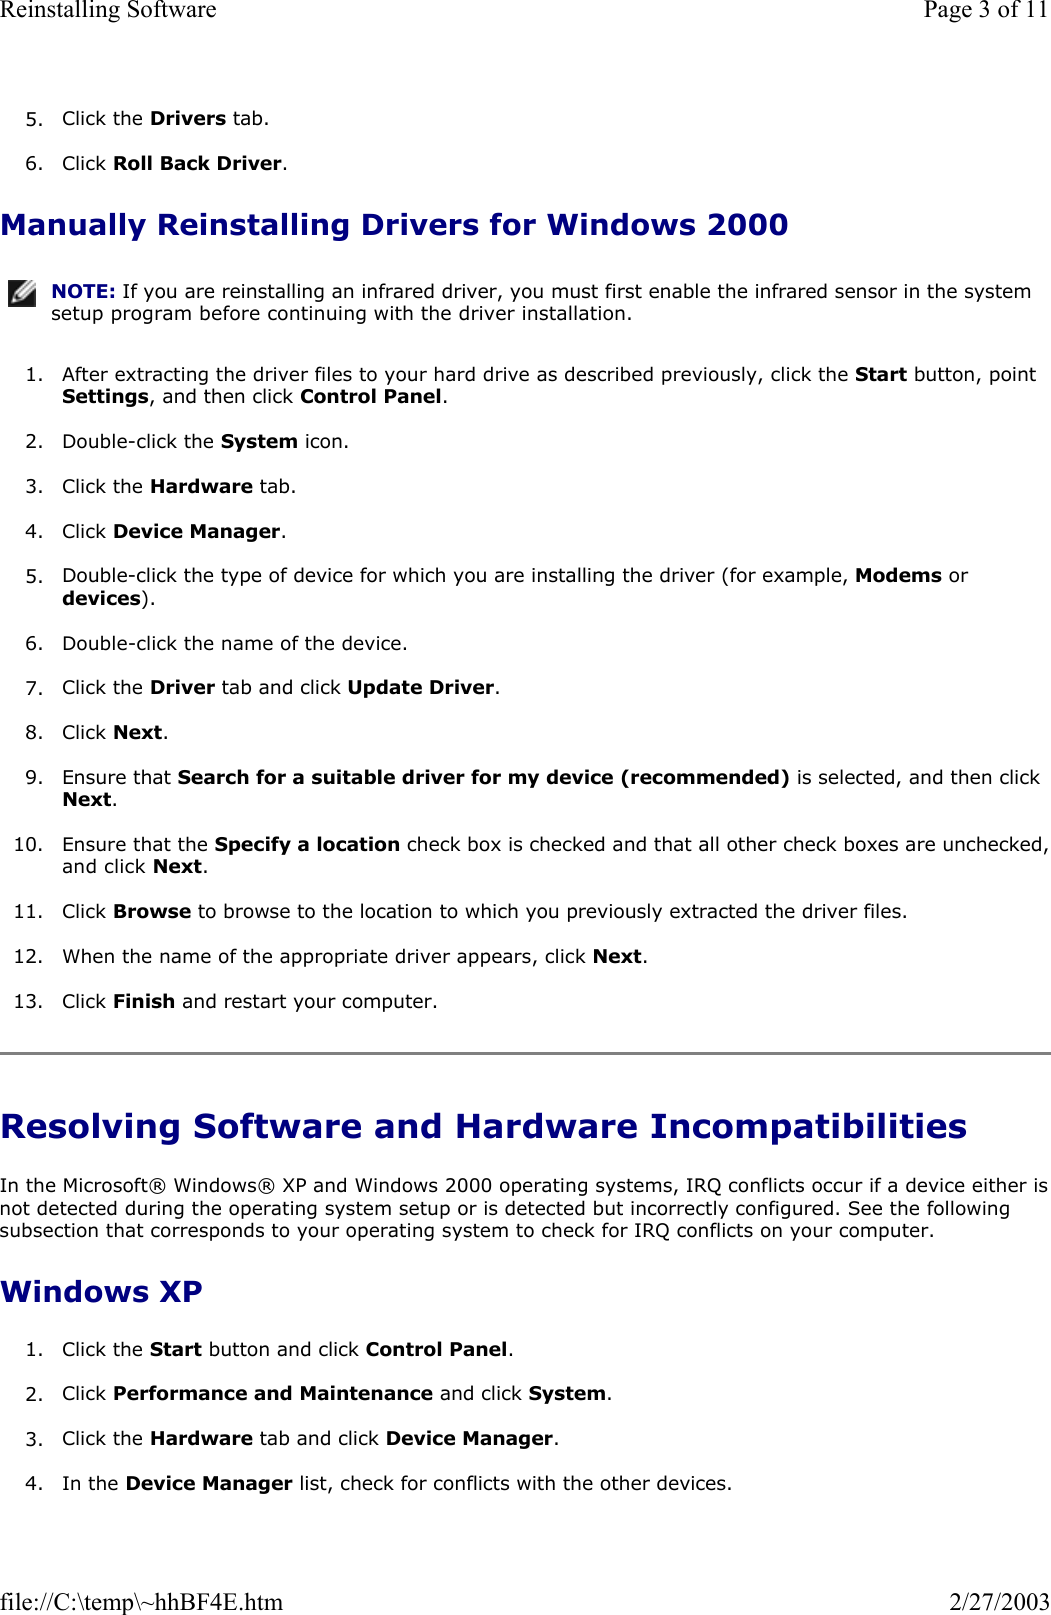 5. Click the Drivers tab.   6. Click Roll Back Driver.  Manually Reinstalling Drivers for Windows 2000 1. After extracting the driver files to your hard drive as described previously, click the Start button, point Settings, and then click Control Panel.  2. Double-click the System icon.  3. Click the Hardware tab.  4. Click Device Manager.  5. Double-click the type of device for which you are installing the driver (for example, Modems or devices).  6. Double-click the name of the device.  7. Click the Driver tab and click Update Driver.  8. Click Next.  9. Ensure that Search for a suitable driver for my device (recommended) is selected, and then click Next.  10. Ensure that the Specify a location check box is checked and that all other check boxes are unchecked,and click Next.  11. Click Browse to browse to the location to which you previously extracted the driver files.  12. When the name of the appropriate driver appears, click Next.  13. Click Finish and restart your computer.  Resolving Software and Hardware Incompatibilities In the Microsoft® Windows® XP and Windows 2000 operating systems, IRQ conflicts occur if a device either isnot detected during the operating system setup or is detected but incorrectly configured. See the following subsection that corresponds to your operating system to check for IRQ conflicts on your computer. Windows XP 1. Click the Start button and click Control Panel.   2. Click Performance and Maintenance and click System.   3. Click the Hardware tab and click Device Manager.  4. In the Device Manager list, check for conflicts with the other devices.  NOTE: If you are reinstalling an infrared driver, you must first enable the infrared sensor in the system setup program before continuing with the driver installation.Page 3 of 11Reinstalling Software2/27/2003file://C:\temp\~hhBF4E.htm